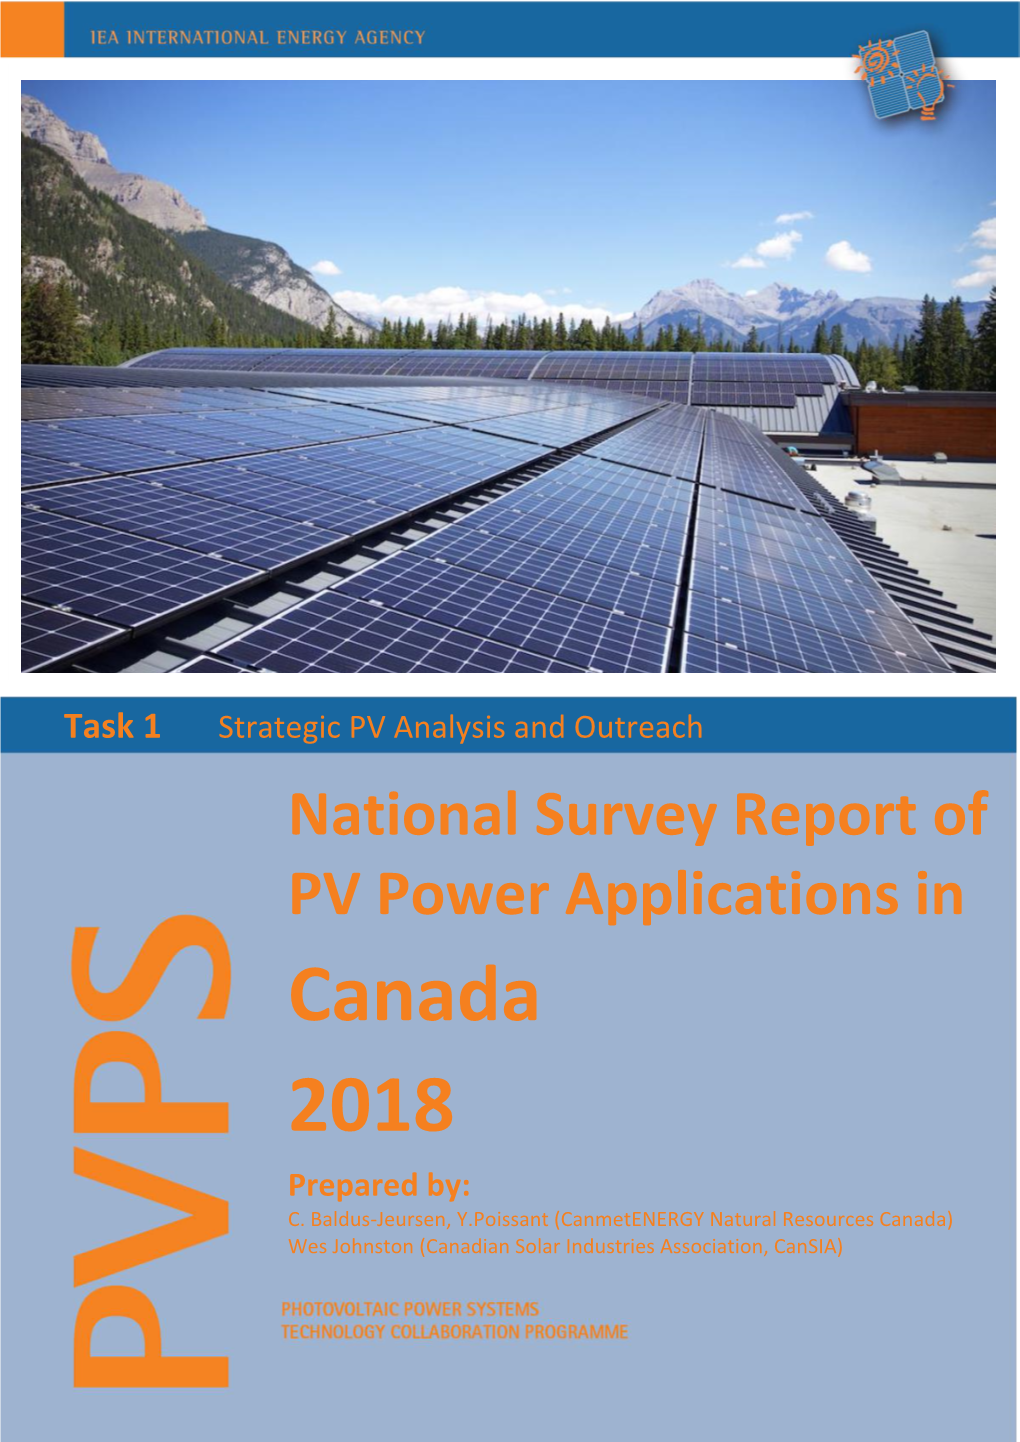 National Survey Report of PV Power Applications in Canada 2018